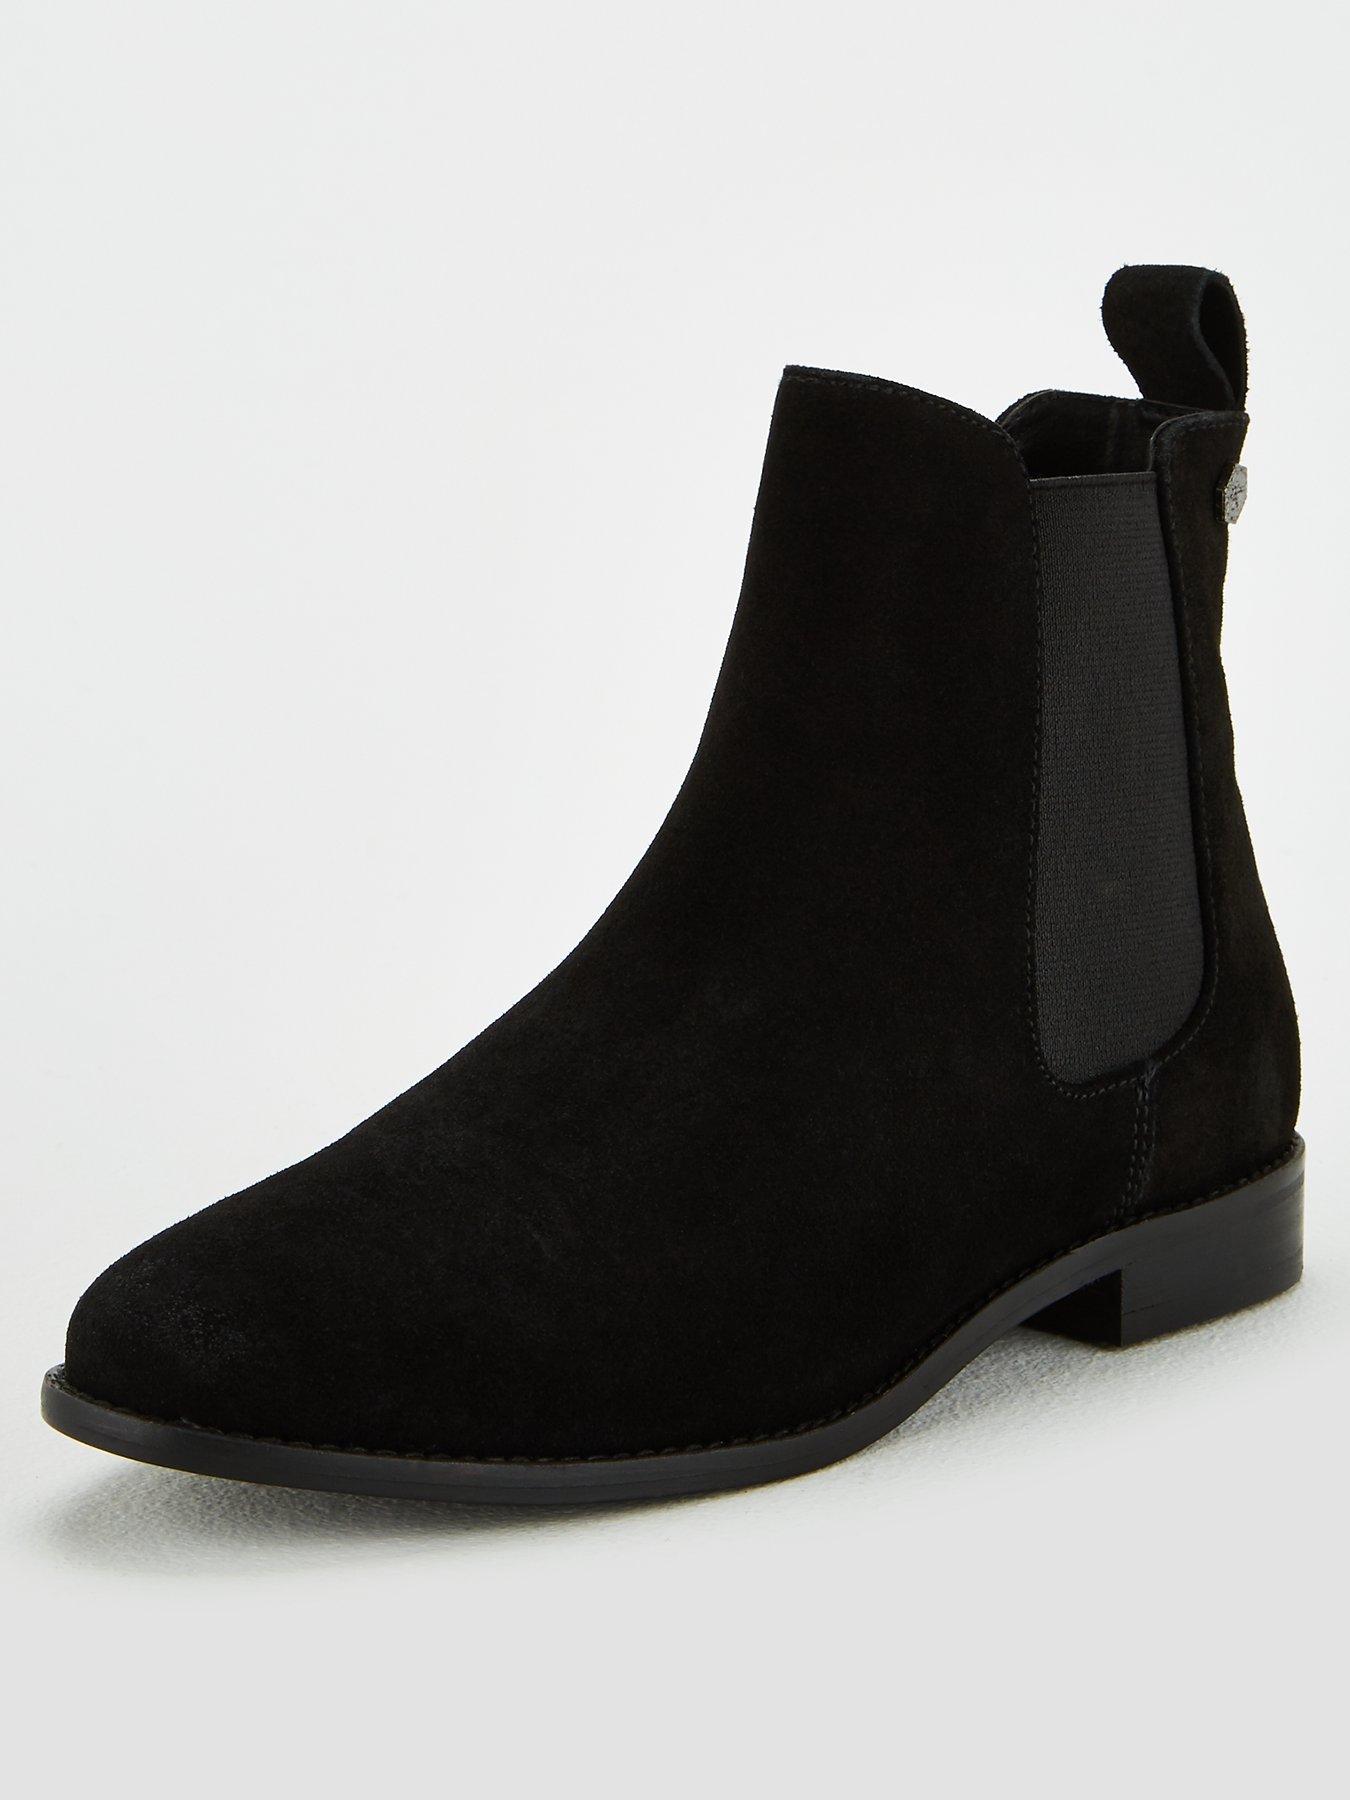 superdry millie jane chelsea boots